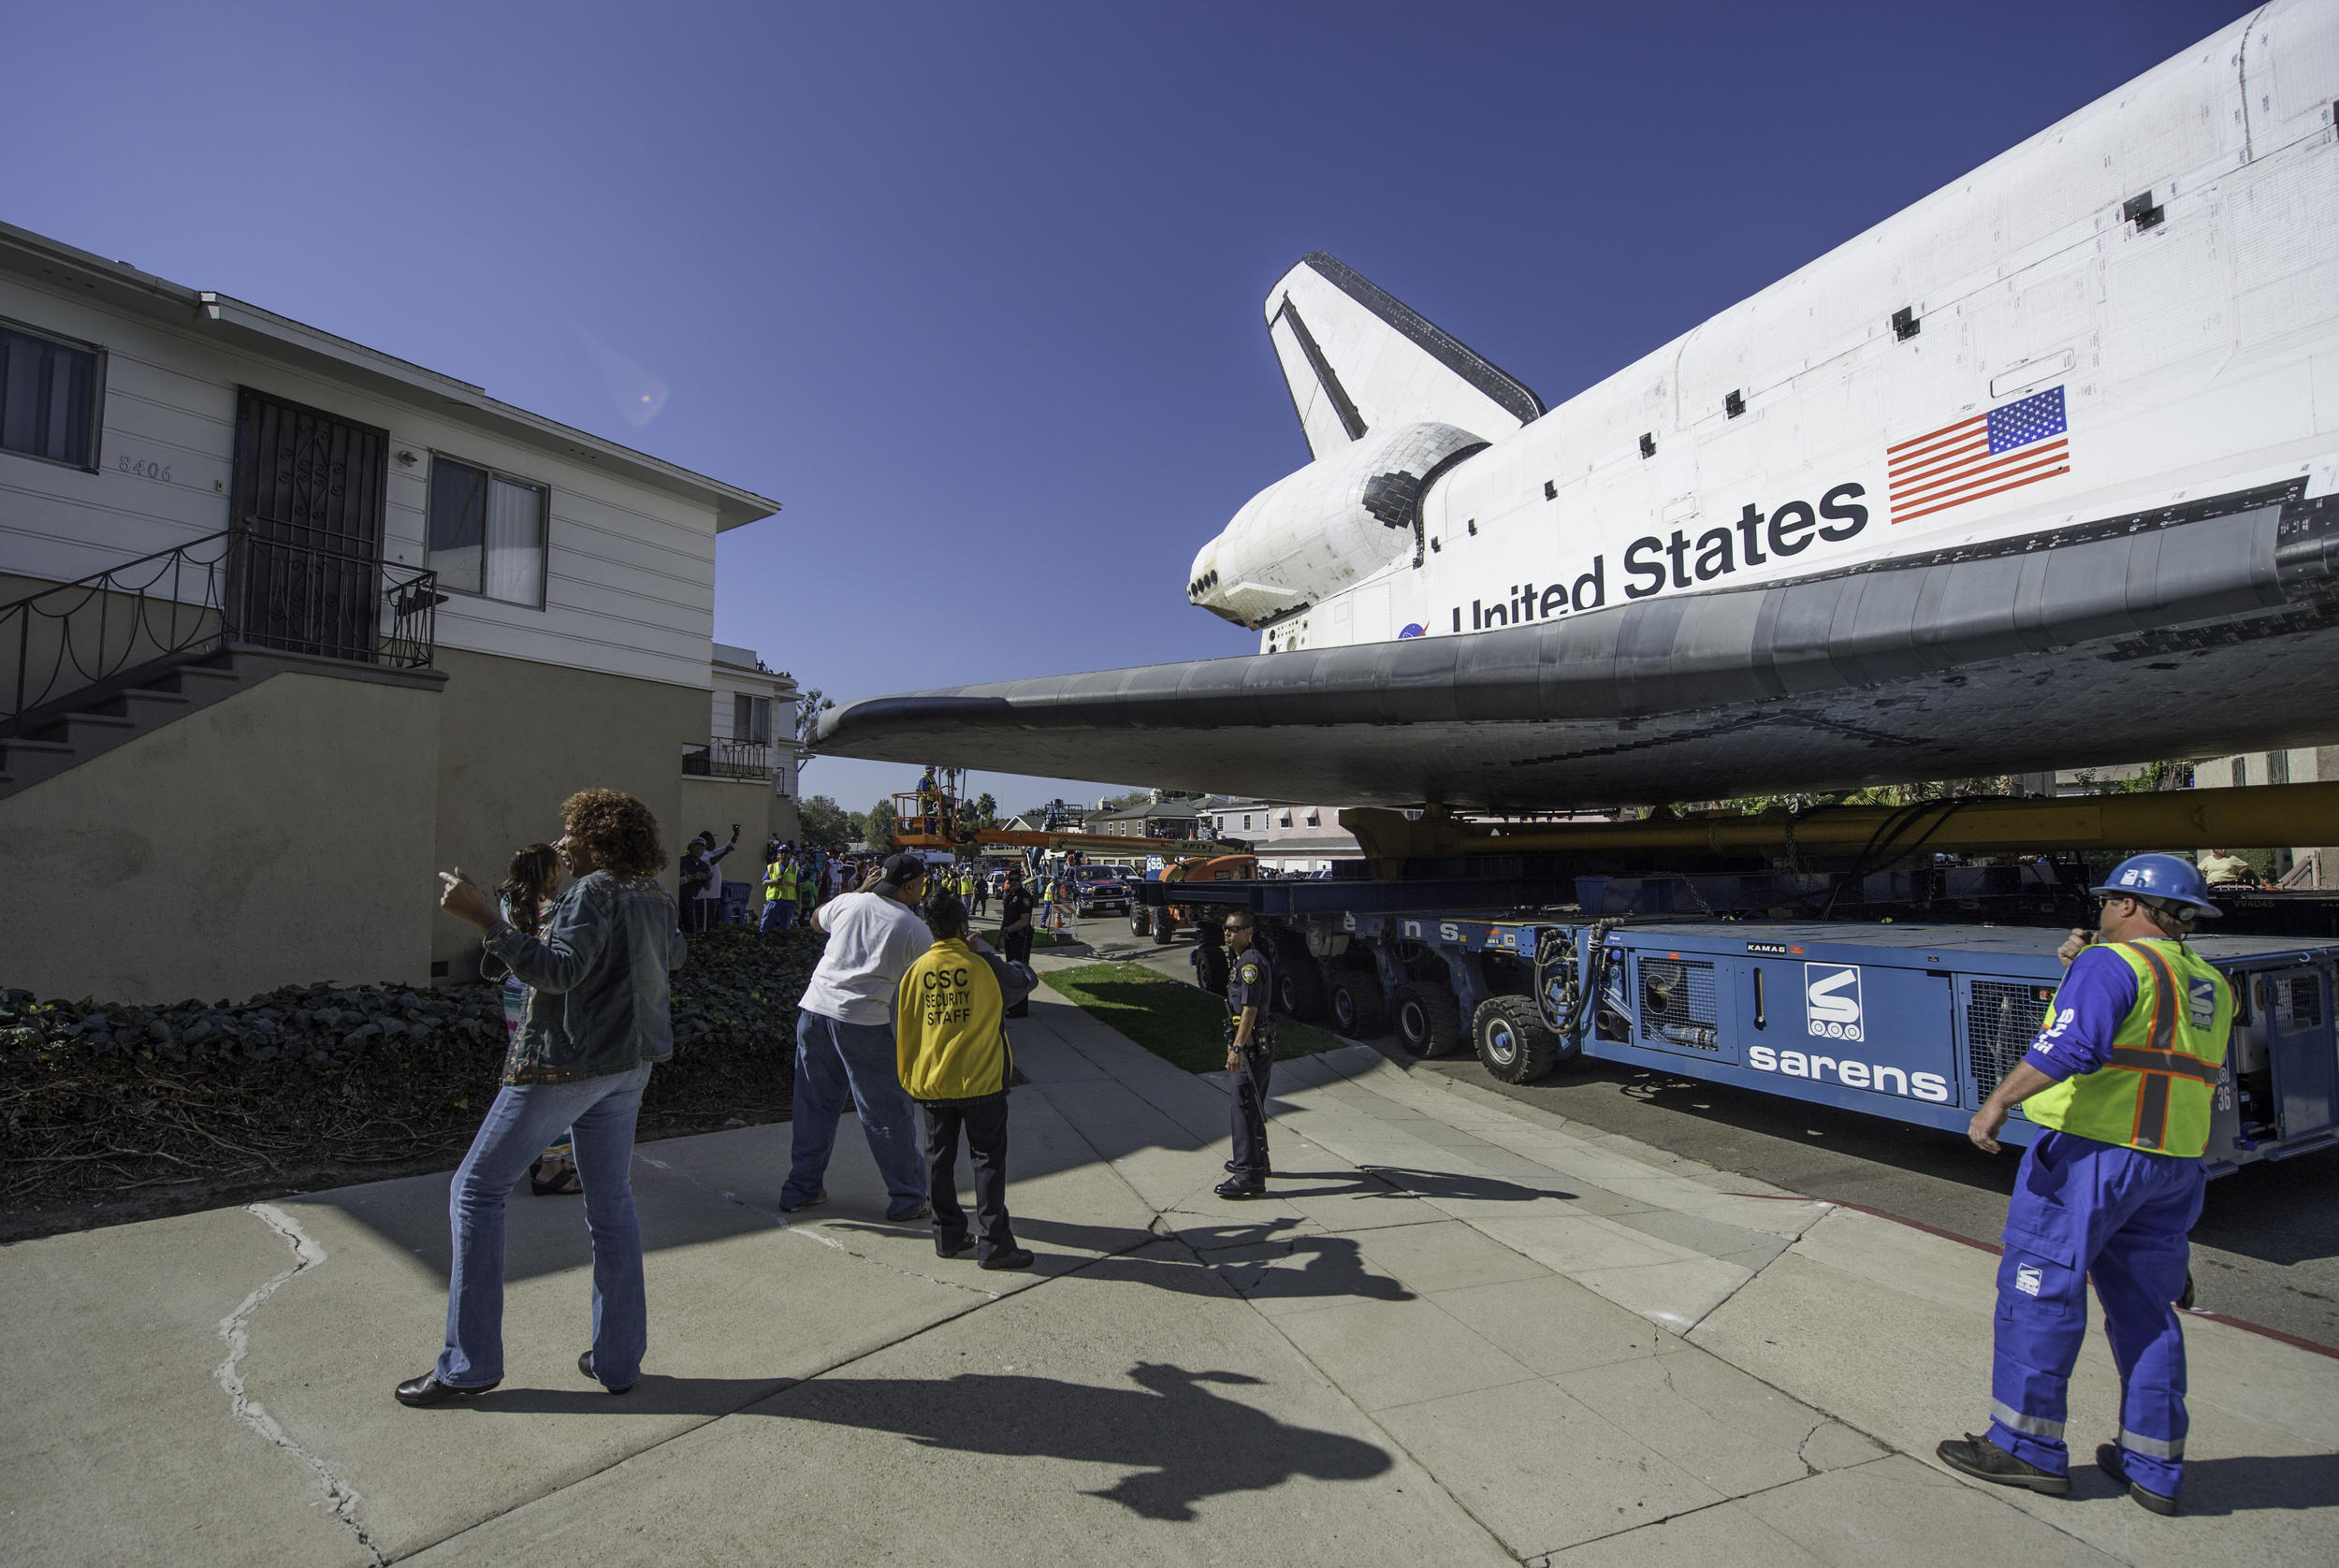  Space shuttle Endeavour is seen on the streets of Inglewood, CA as it narrowly passes a house on Saturday, Oct. 13, 2012. Endeavour, built as a replacement for space shuttle Challenger, completed 25 missions, spent 299 days in orbit, and orbited Ear